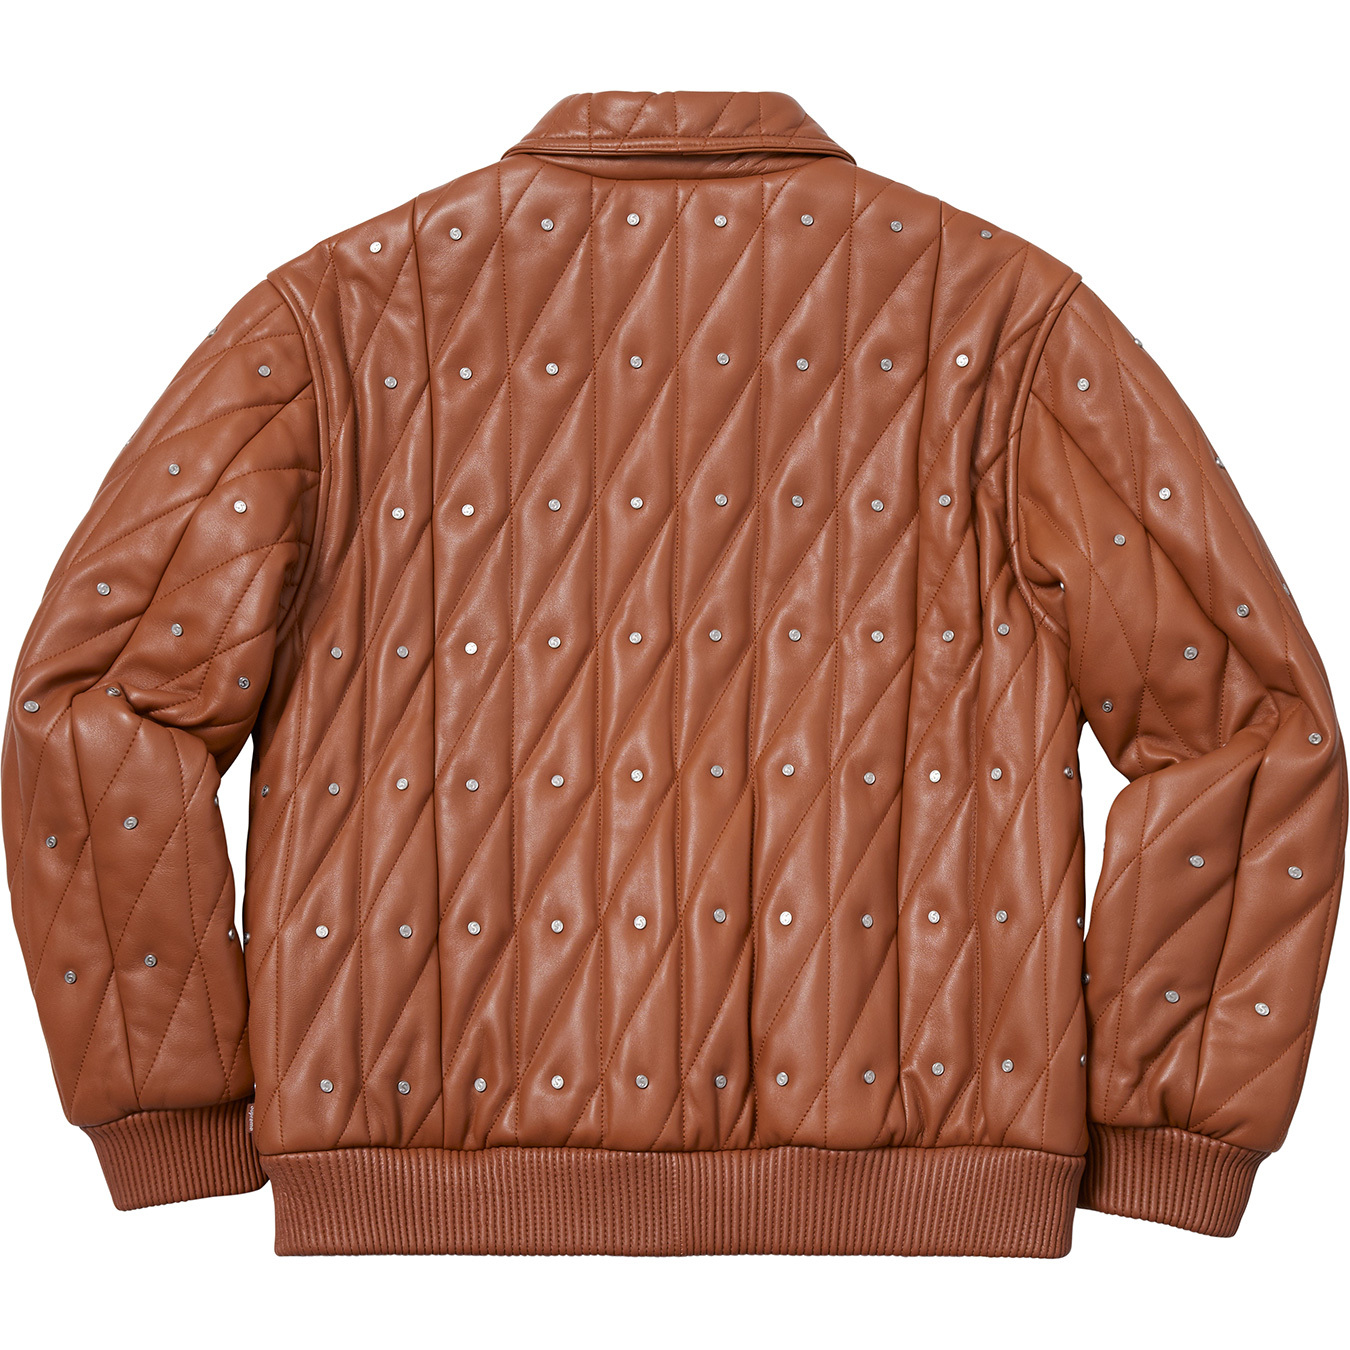 Quilted Studded Leather Jacket - fall winter 2018 - Supreme